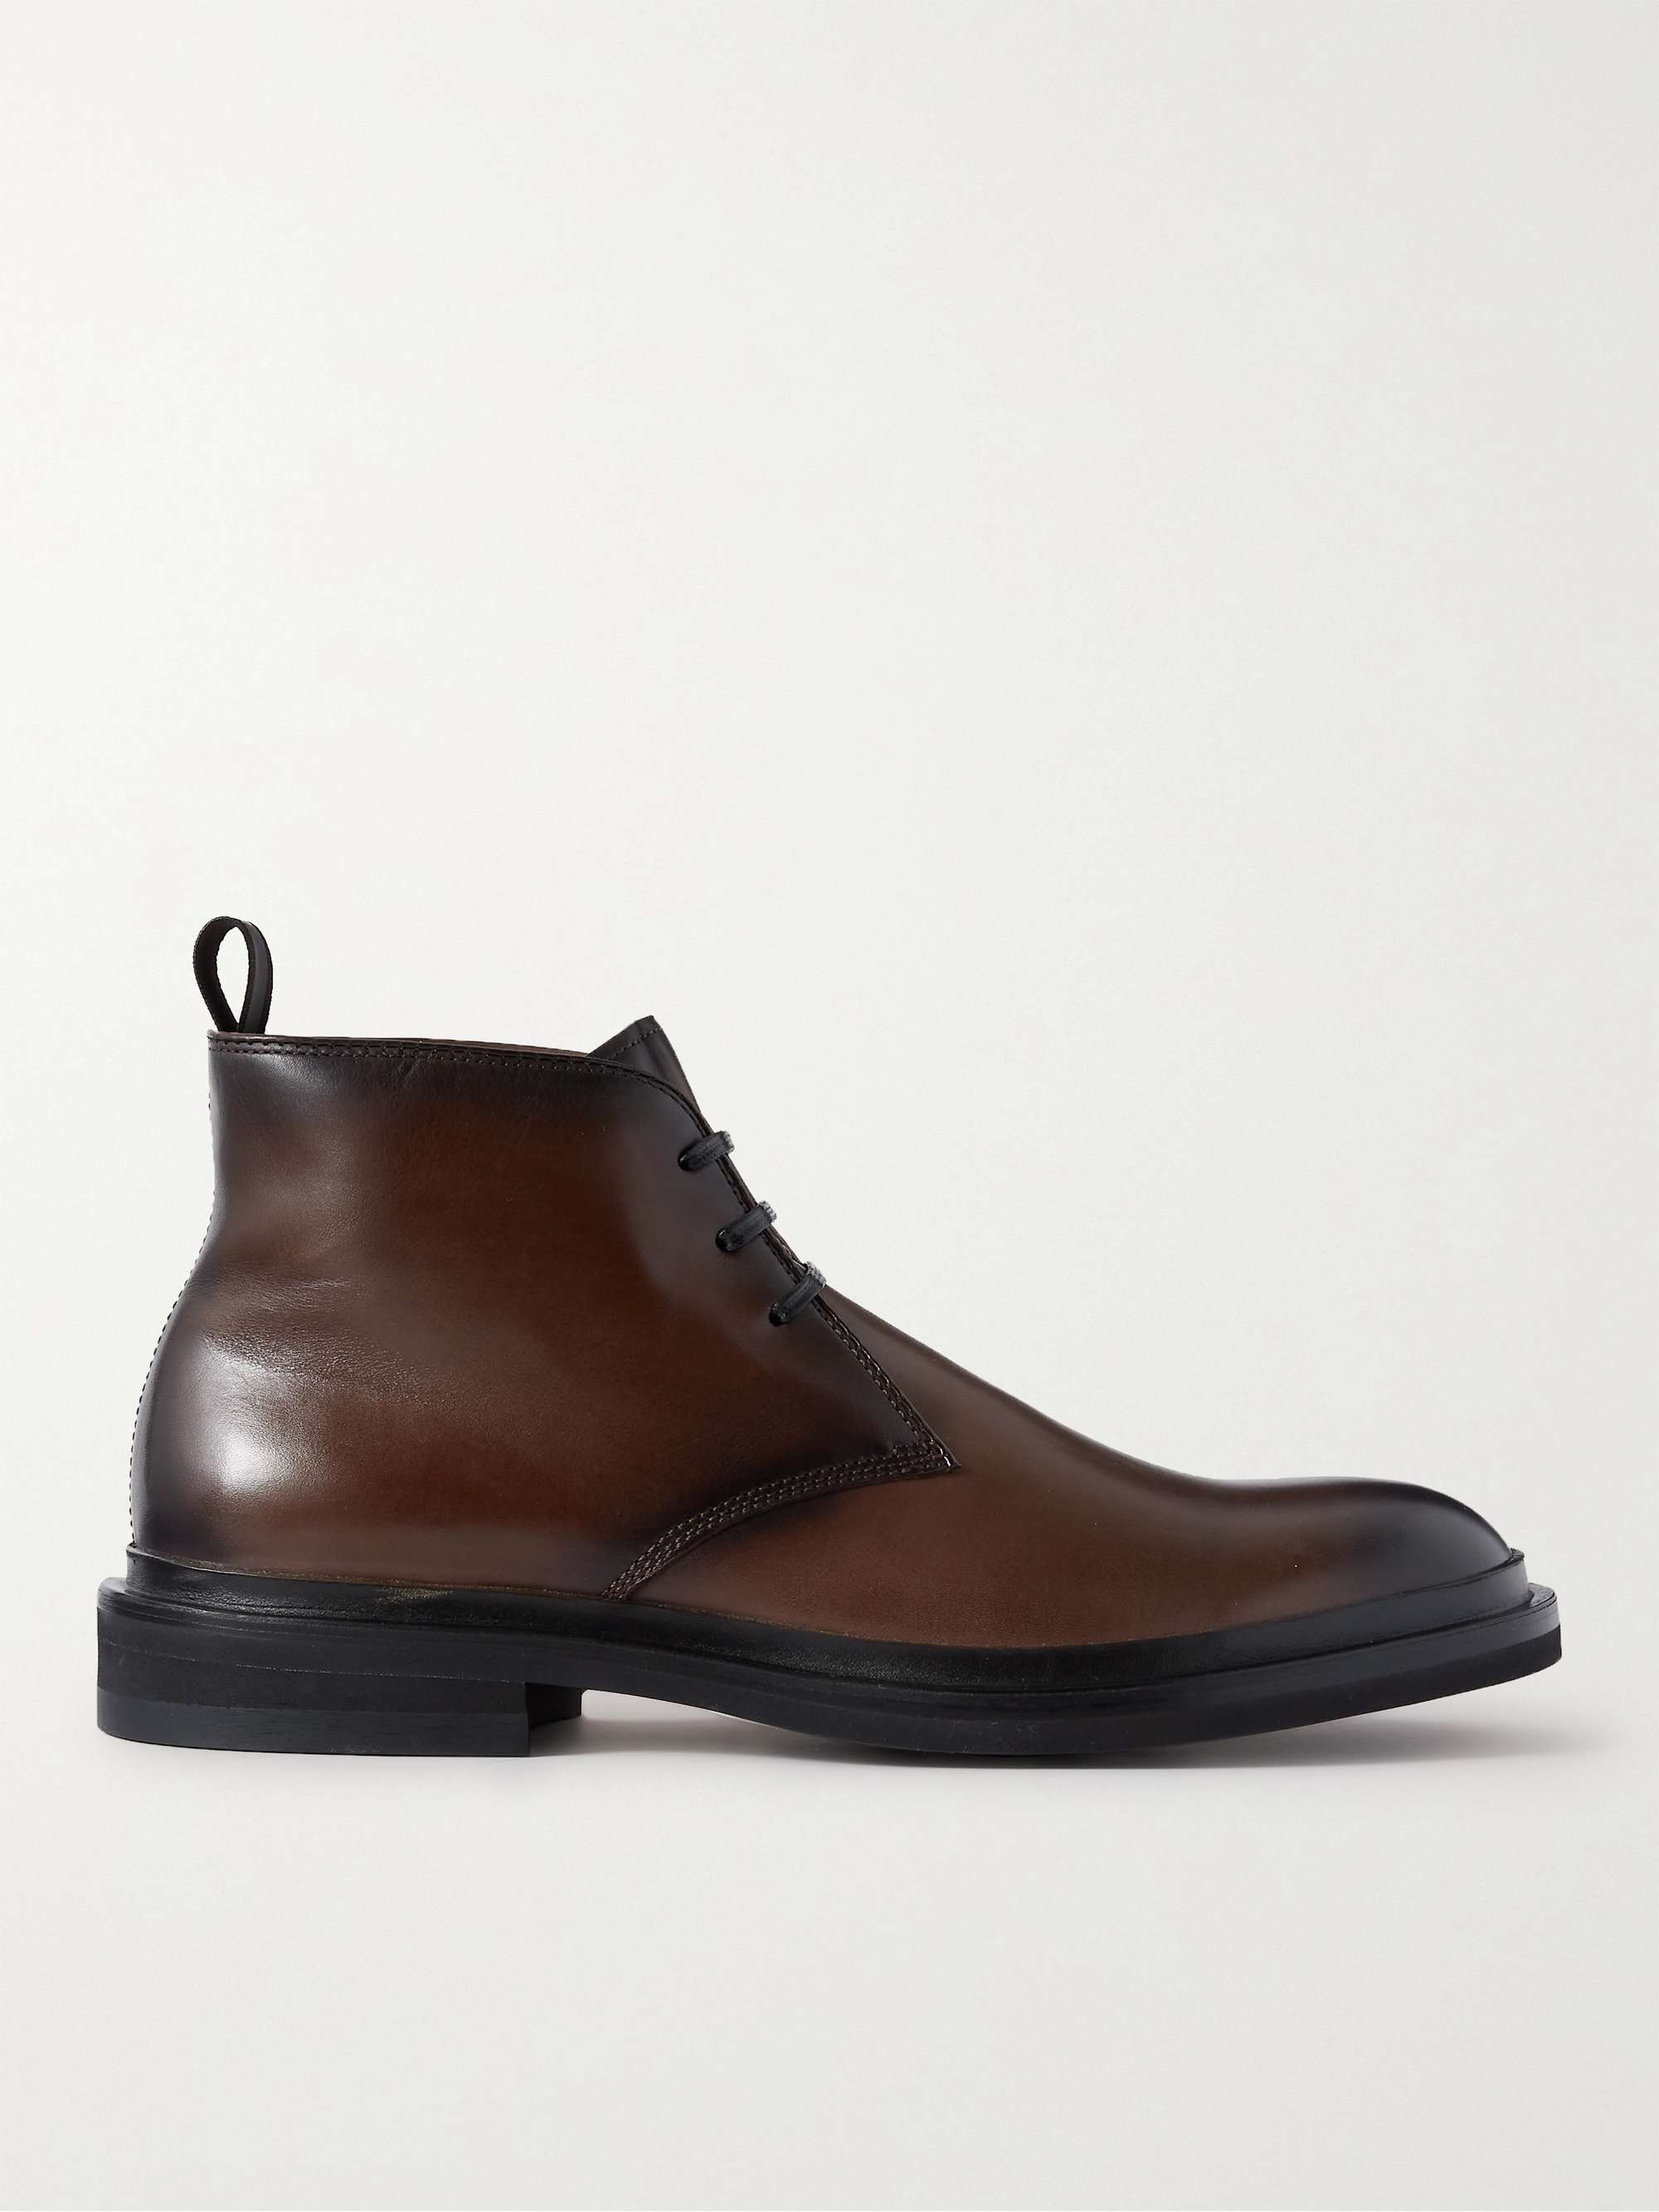 Officine Creative Hopkins Leather Desert Boot in Brown for Men Mens Shoes Boots Chukka boots and desert boots 